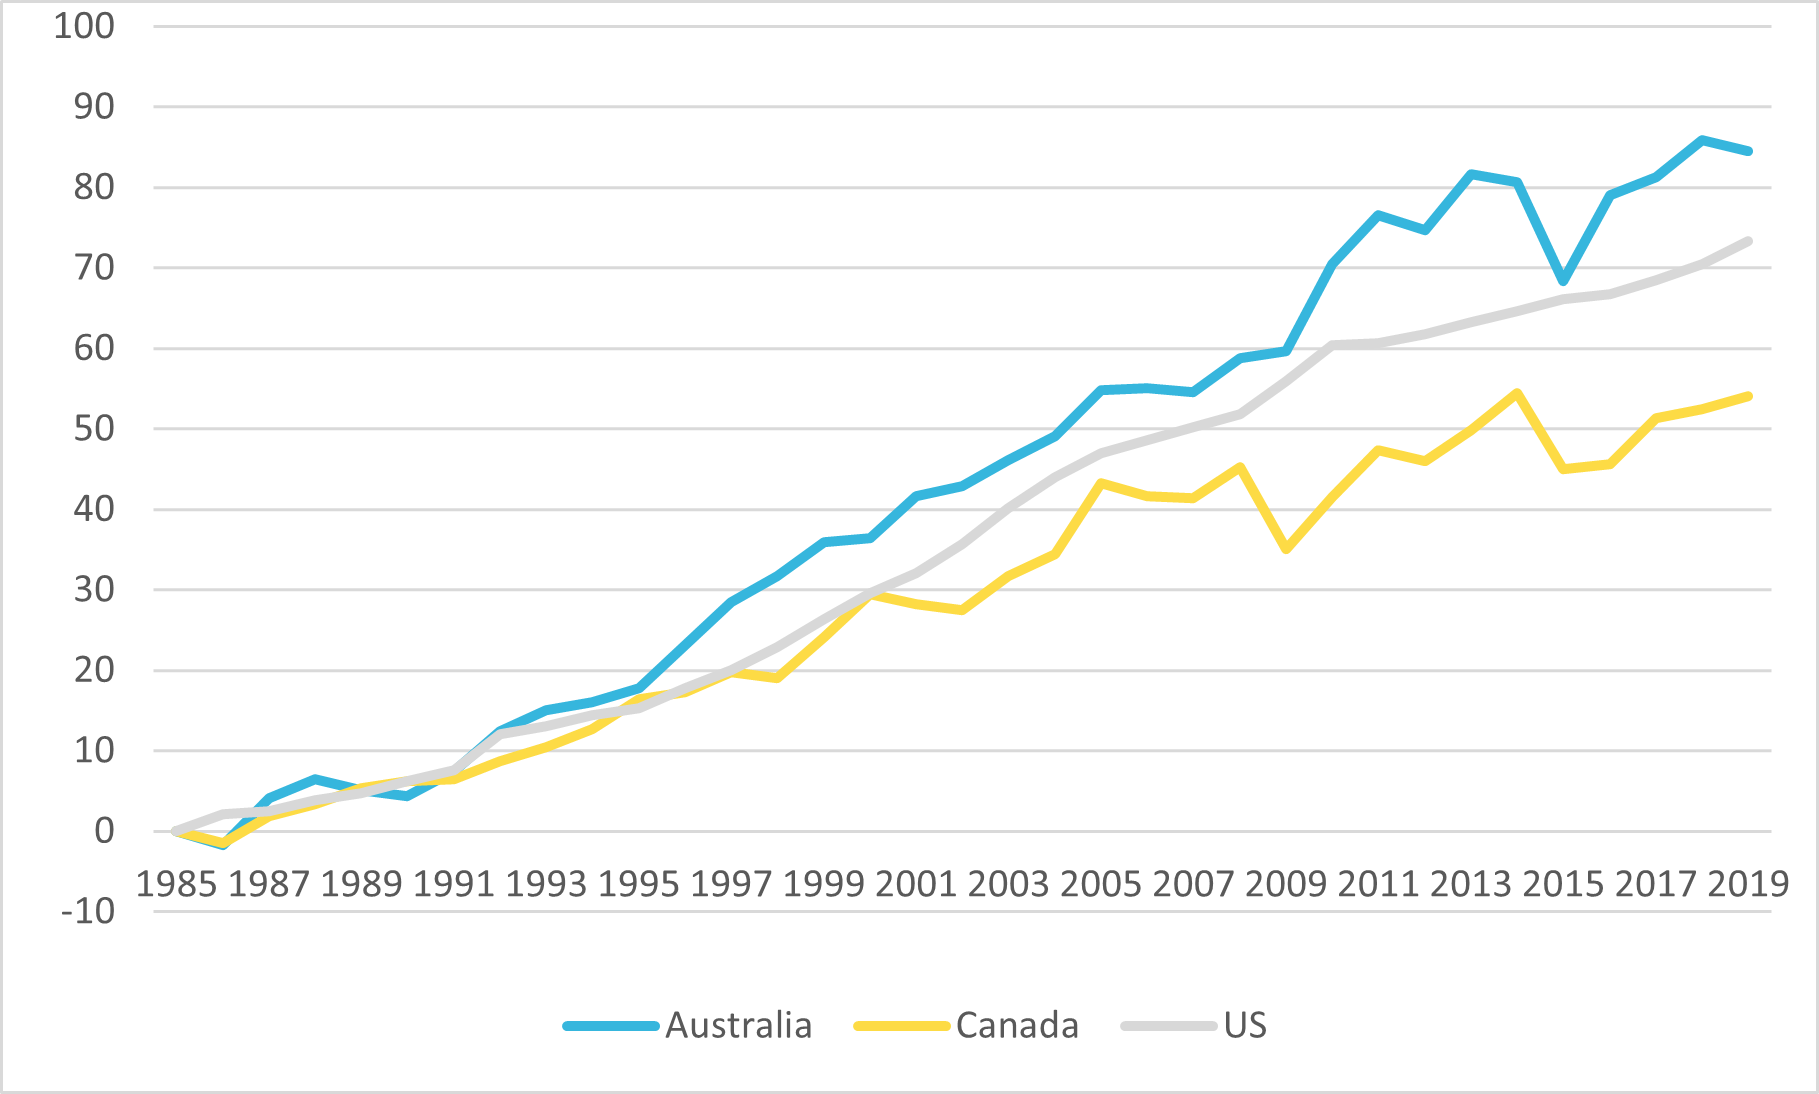 Figure 3 — Percent increase in productivity per hour worked, Canada, Australia and the United States between 1985 and 2019